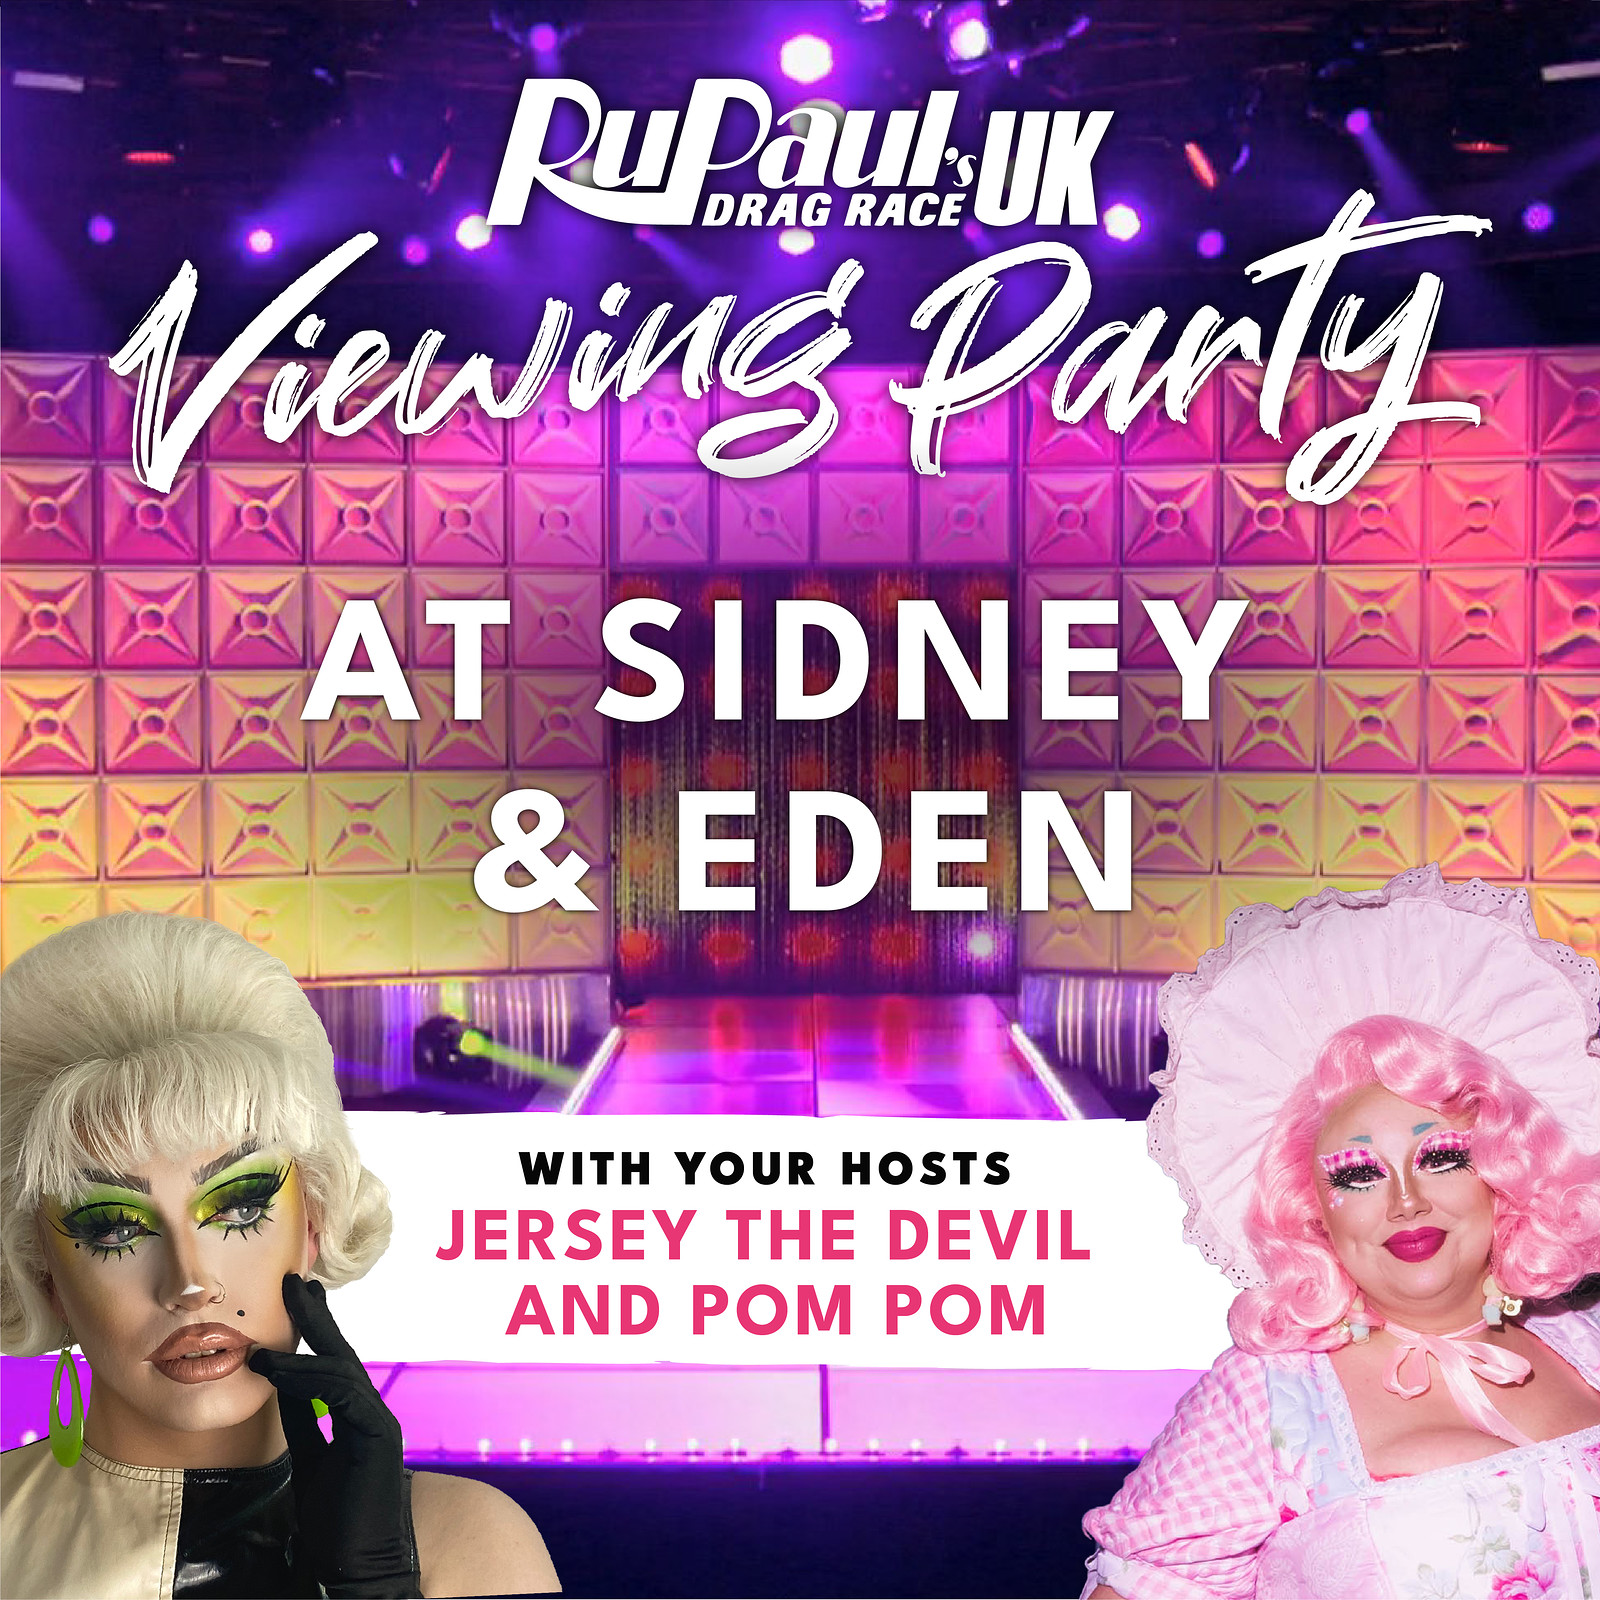 RuPaul's Drag Race UK Episode 10 Viewing Party at Sidney & Eden